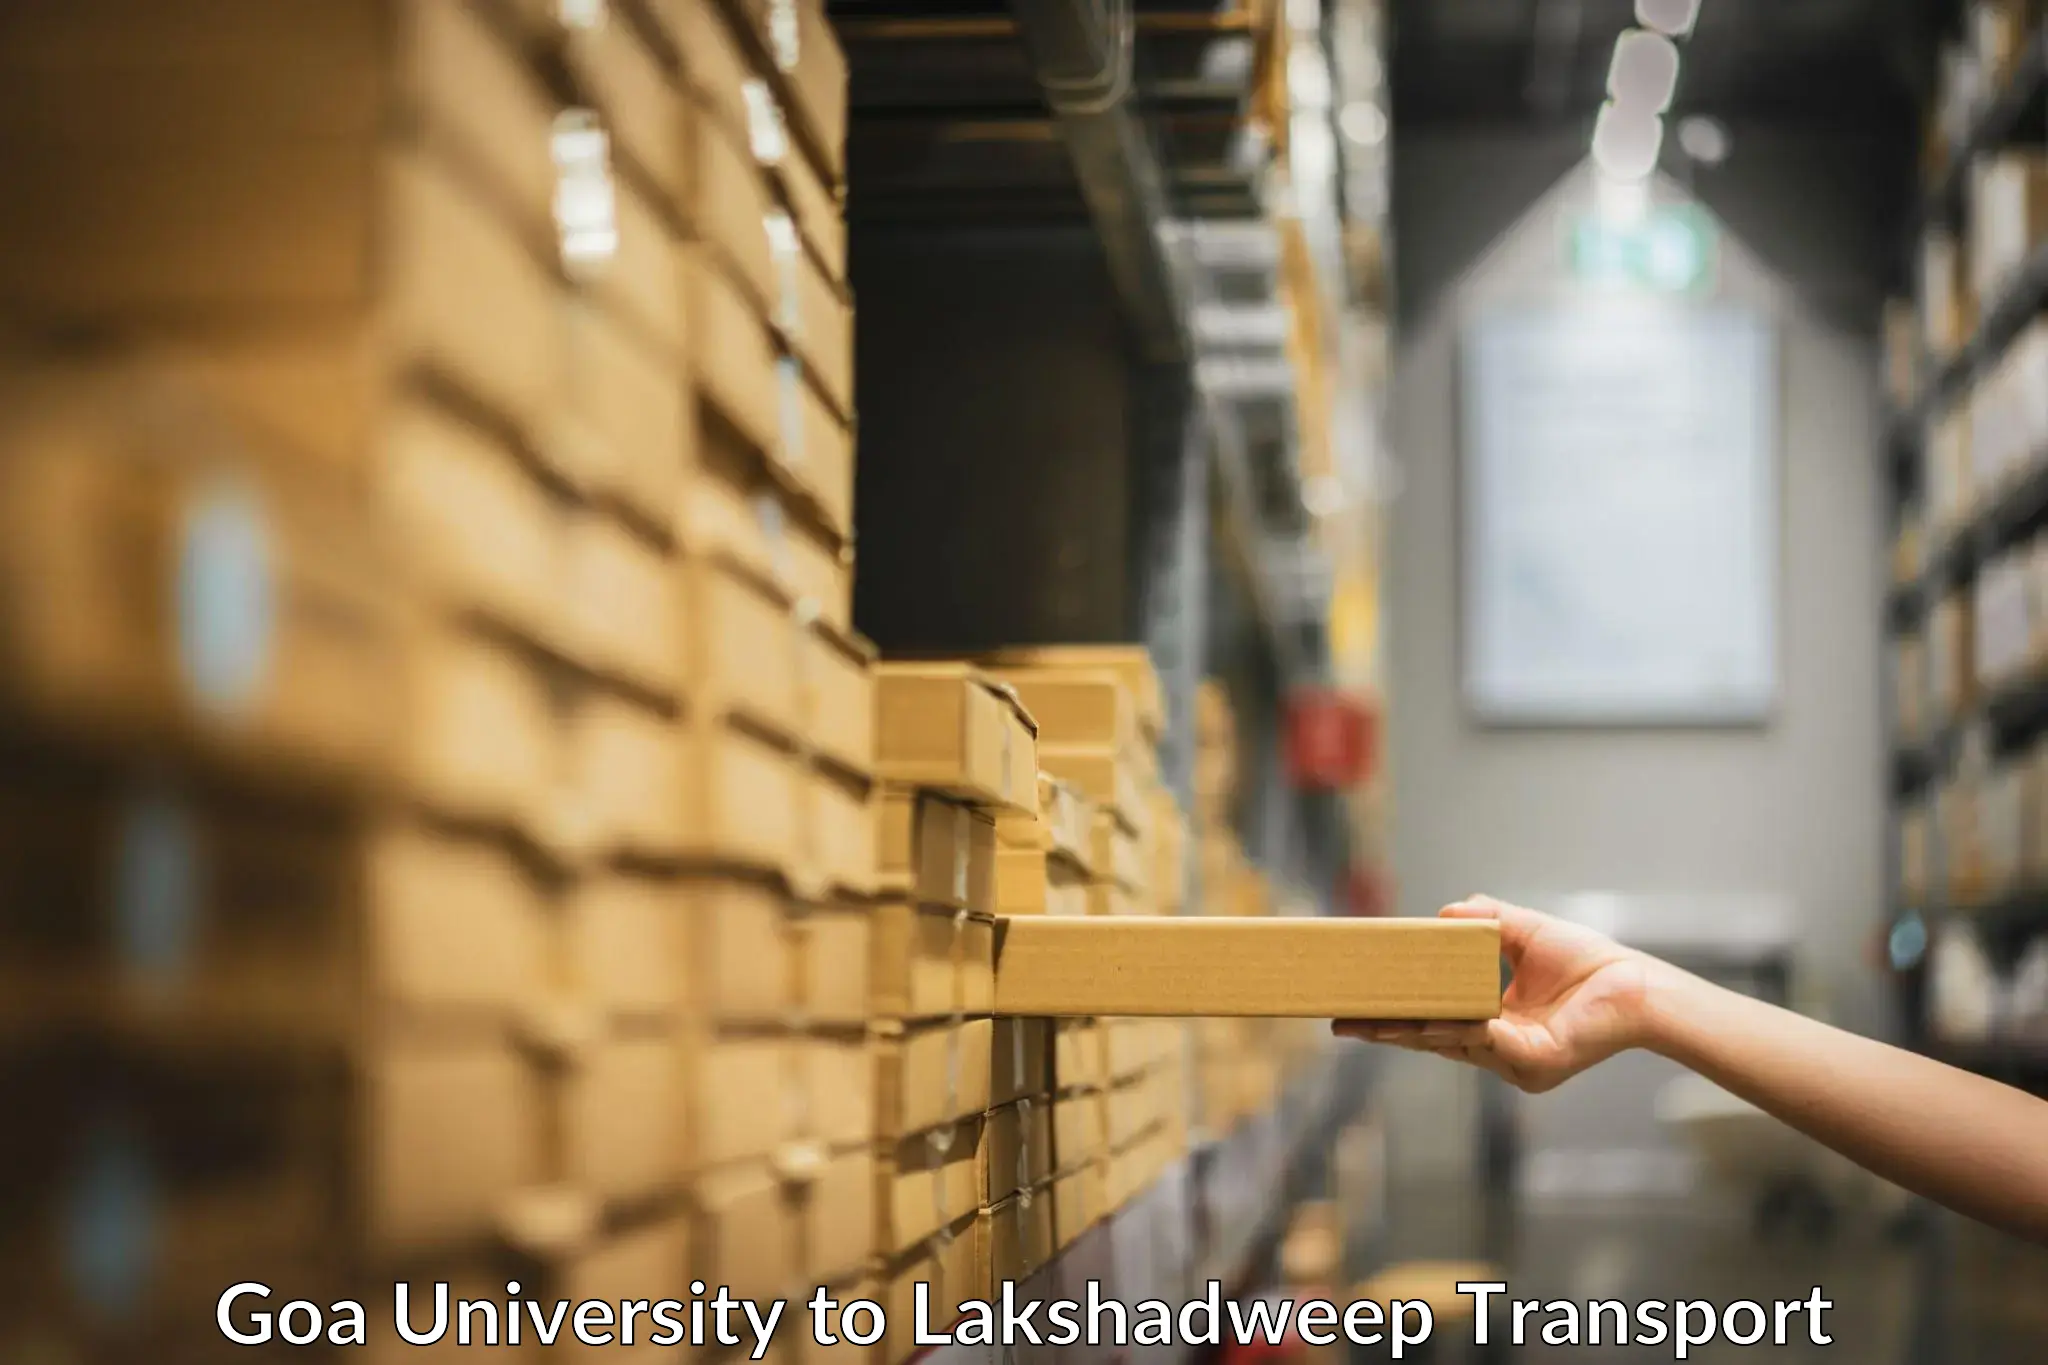 Container transport service Goa University to Lakshadweep